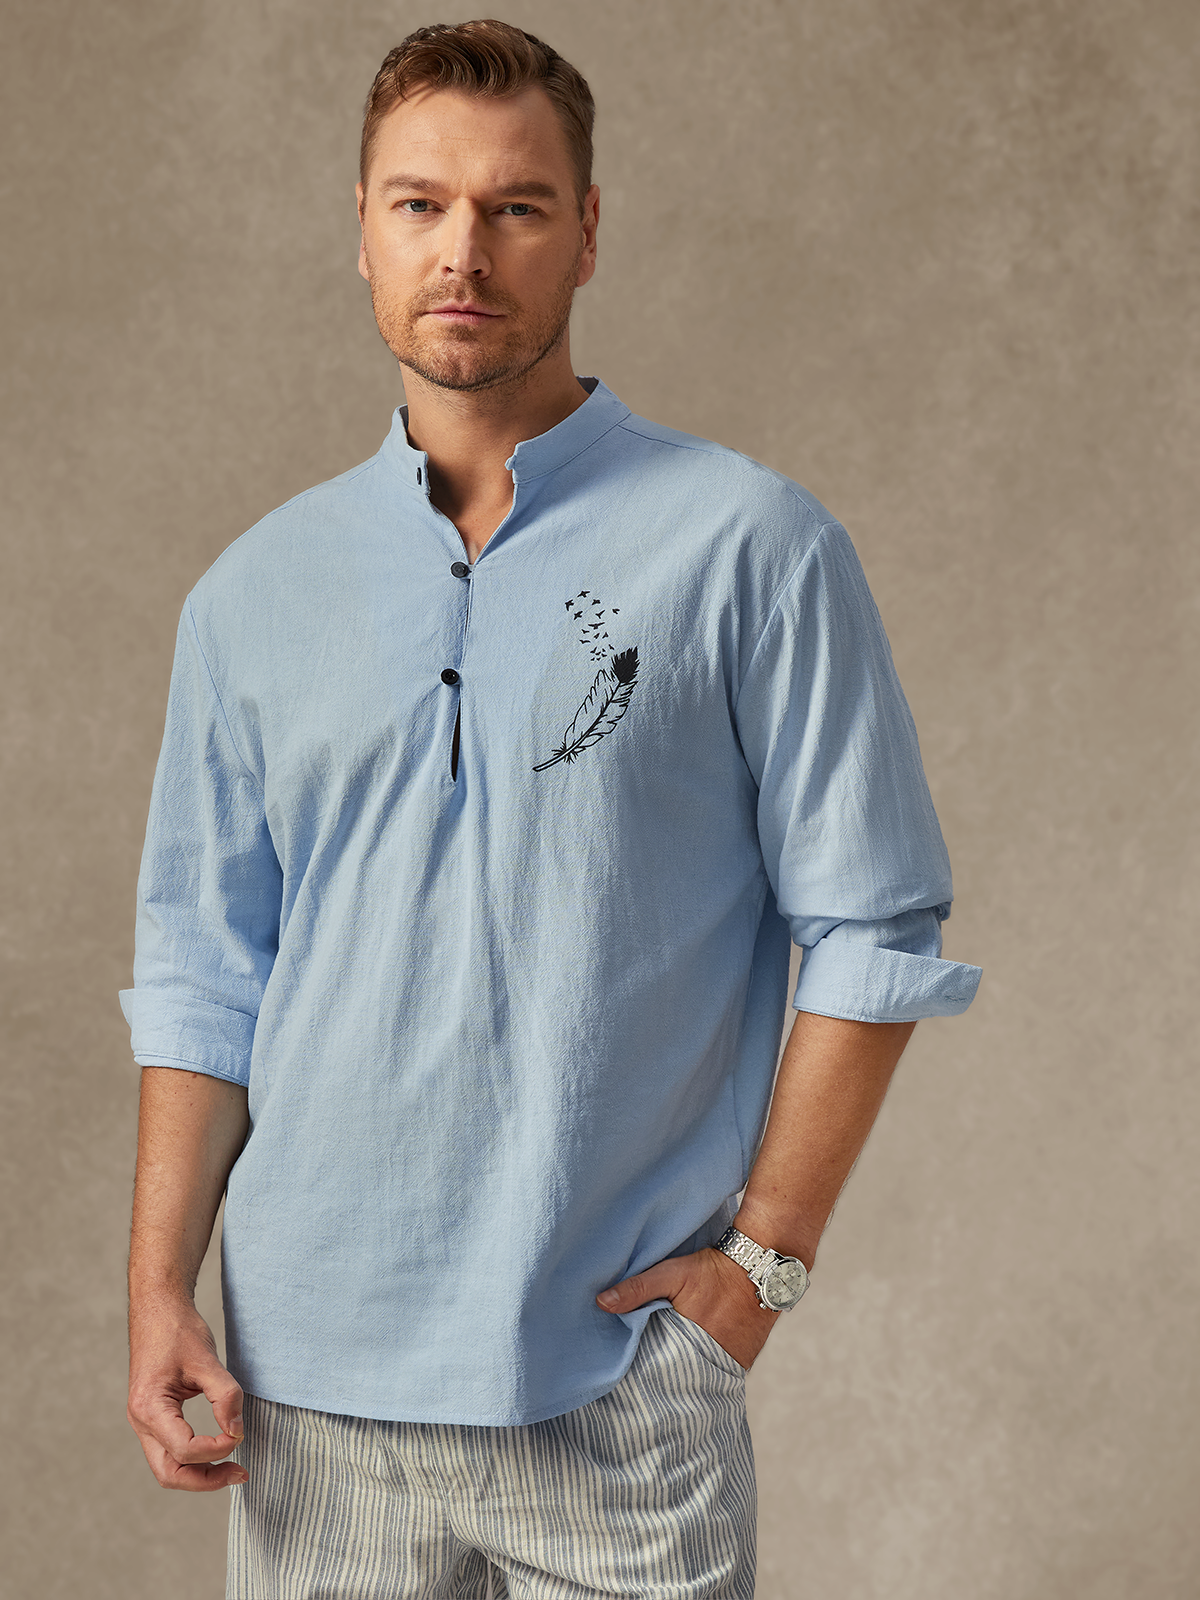 Hardaddy Cotton Feather Long Sleeve Casual Shirt